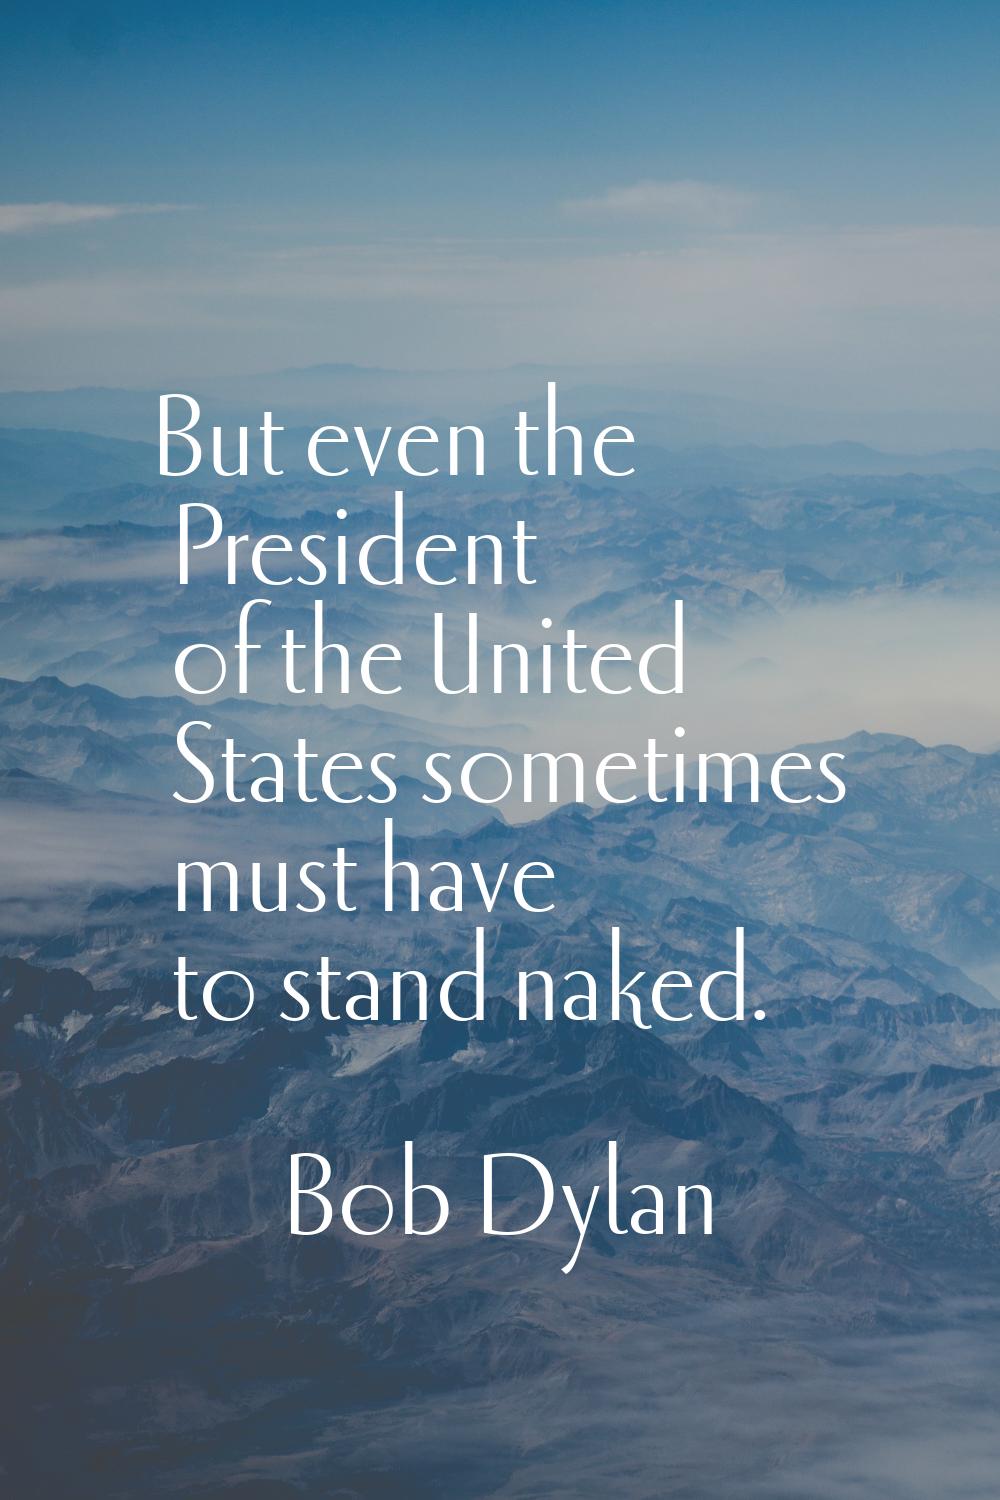 But even the President of the United States sometimes must have to stand naked.